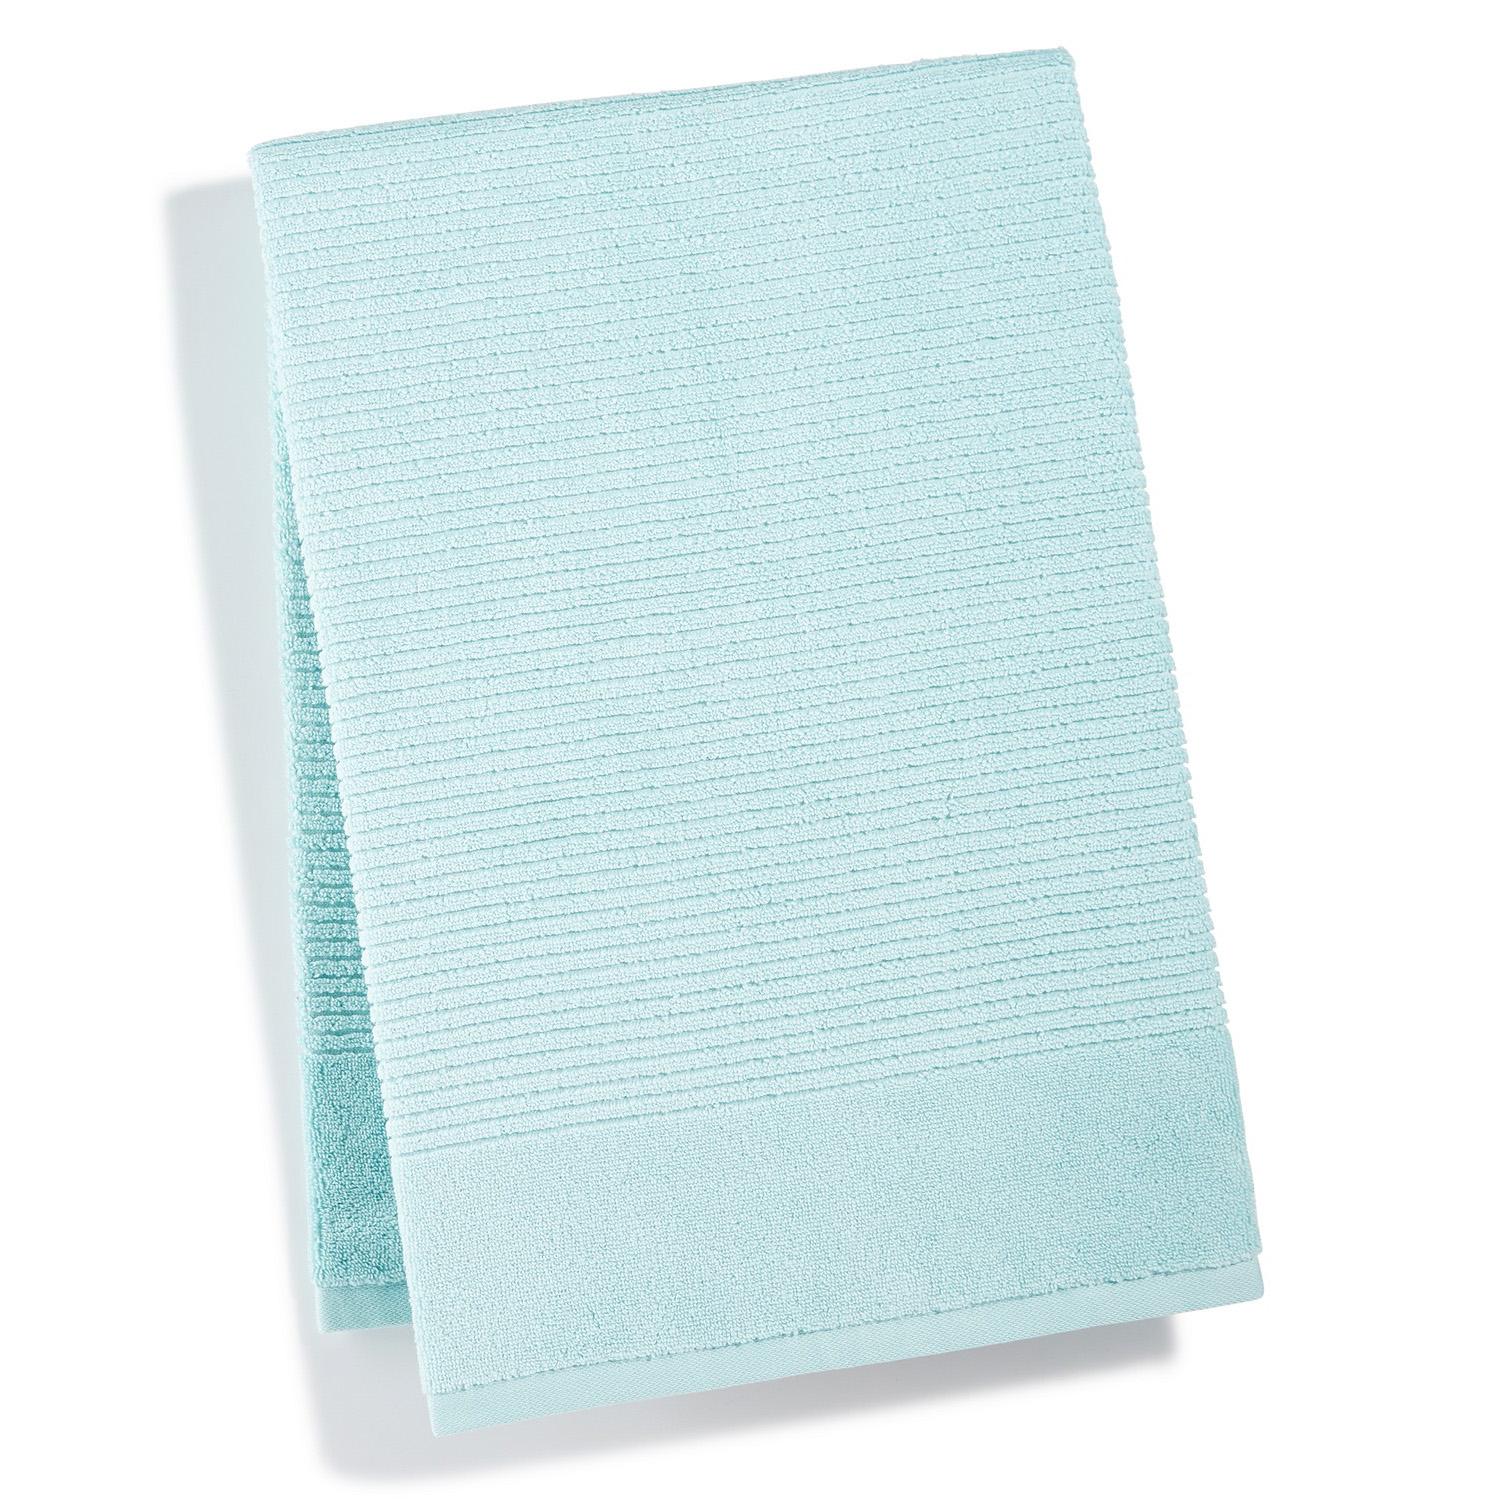 Martha Stewart Collection Quick Dry Reversible Bath Towels for $2.99